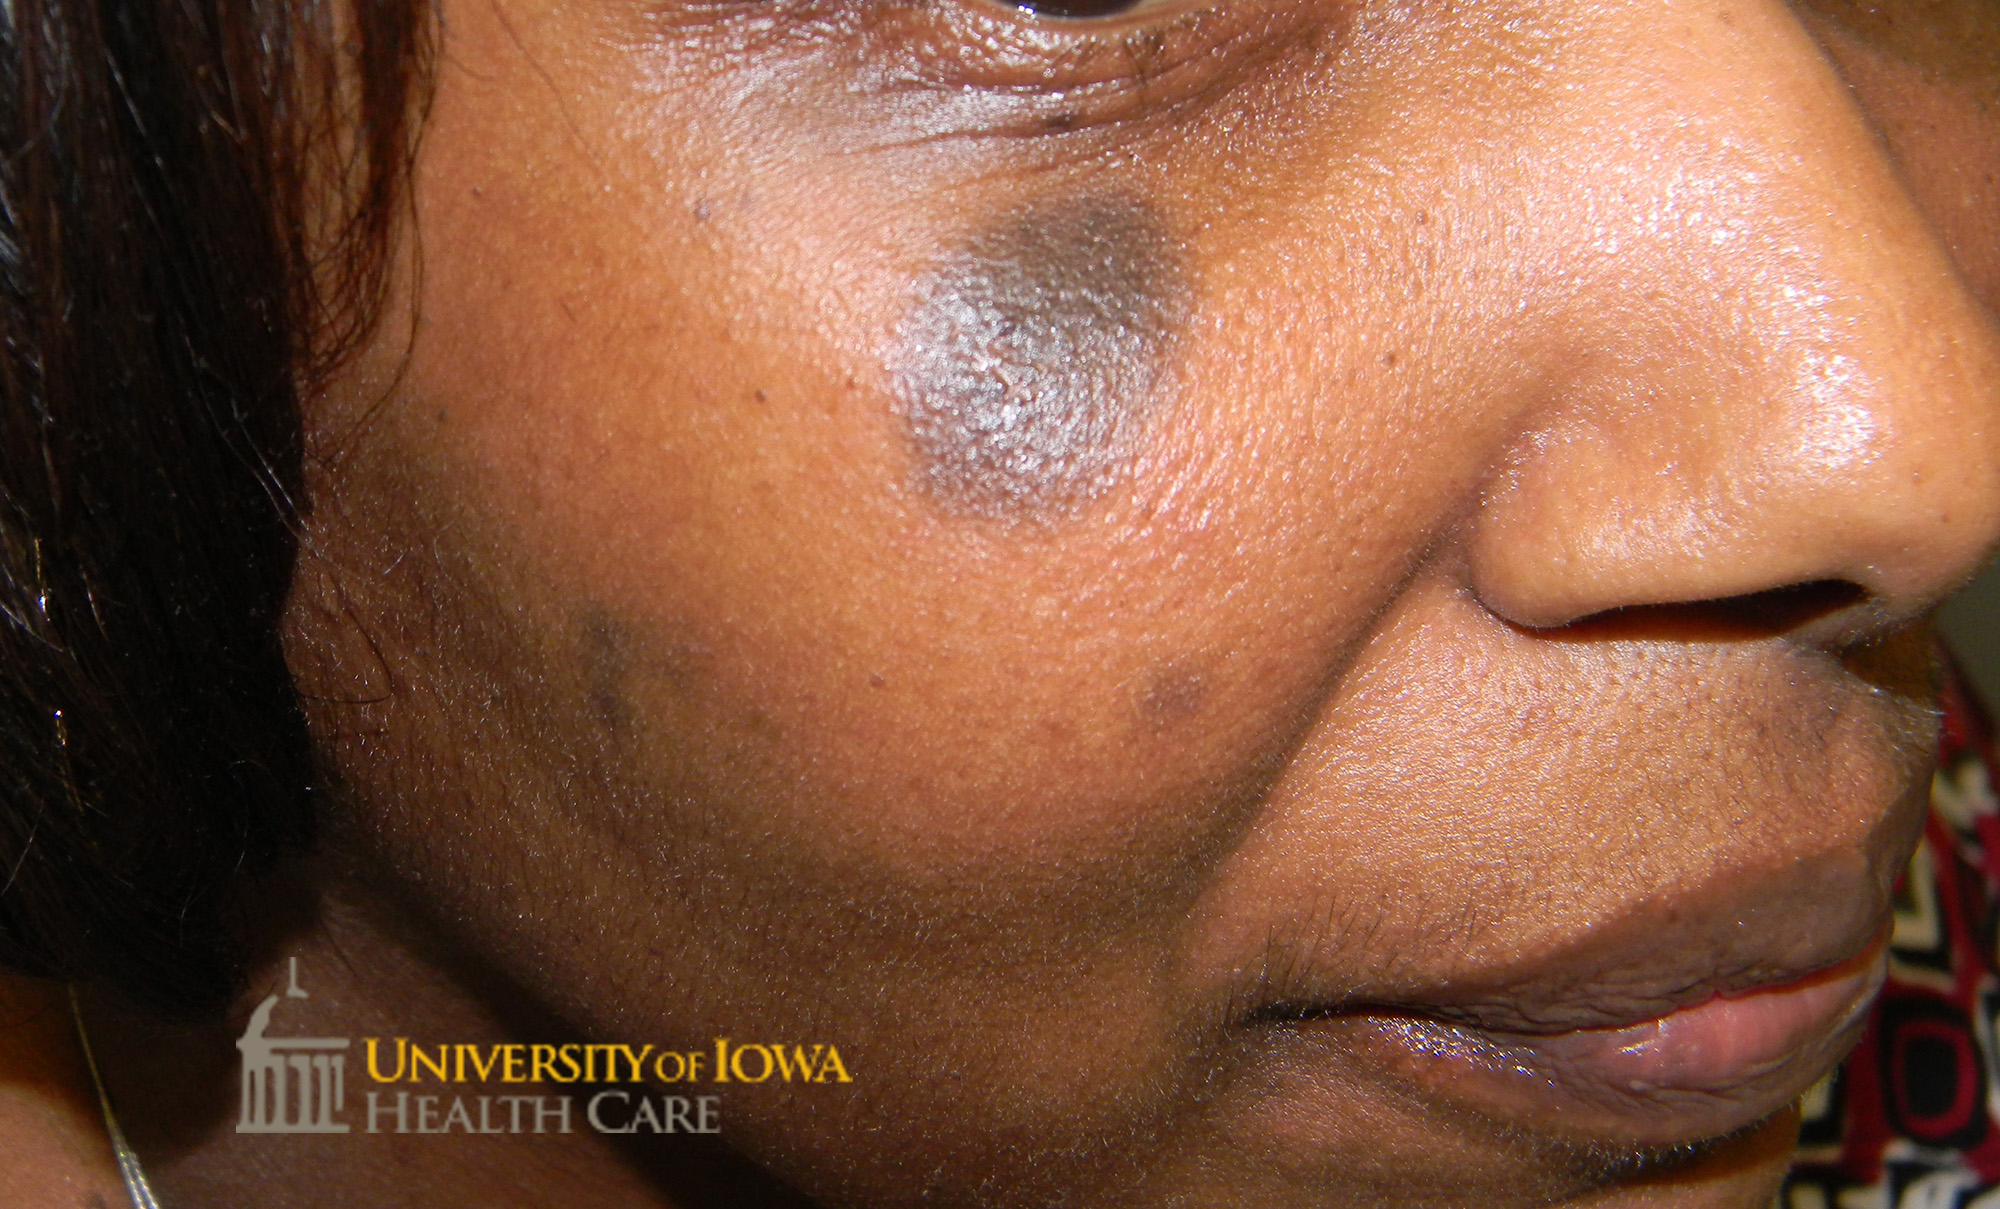 Dark gray round thin plaque on the cheek. (click images for higher resolution).